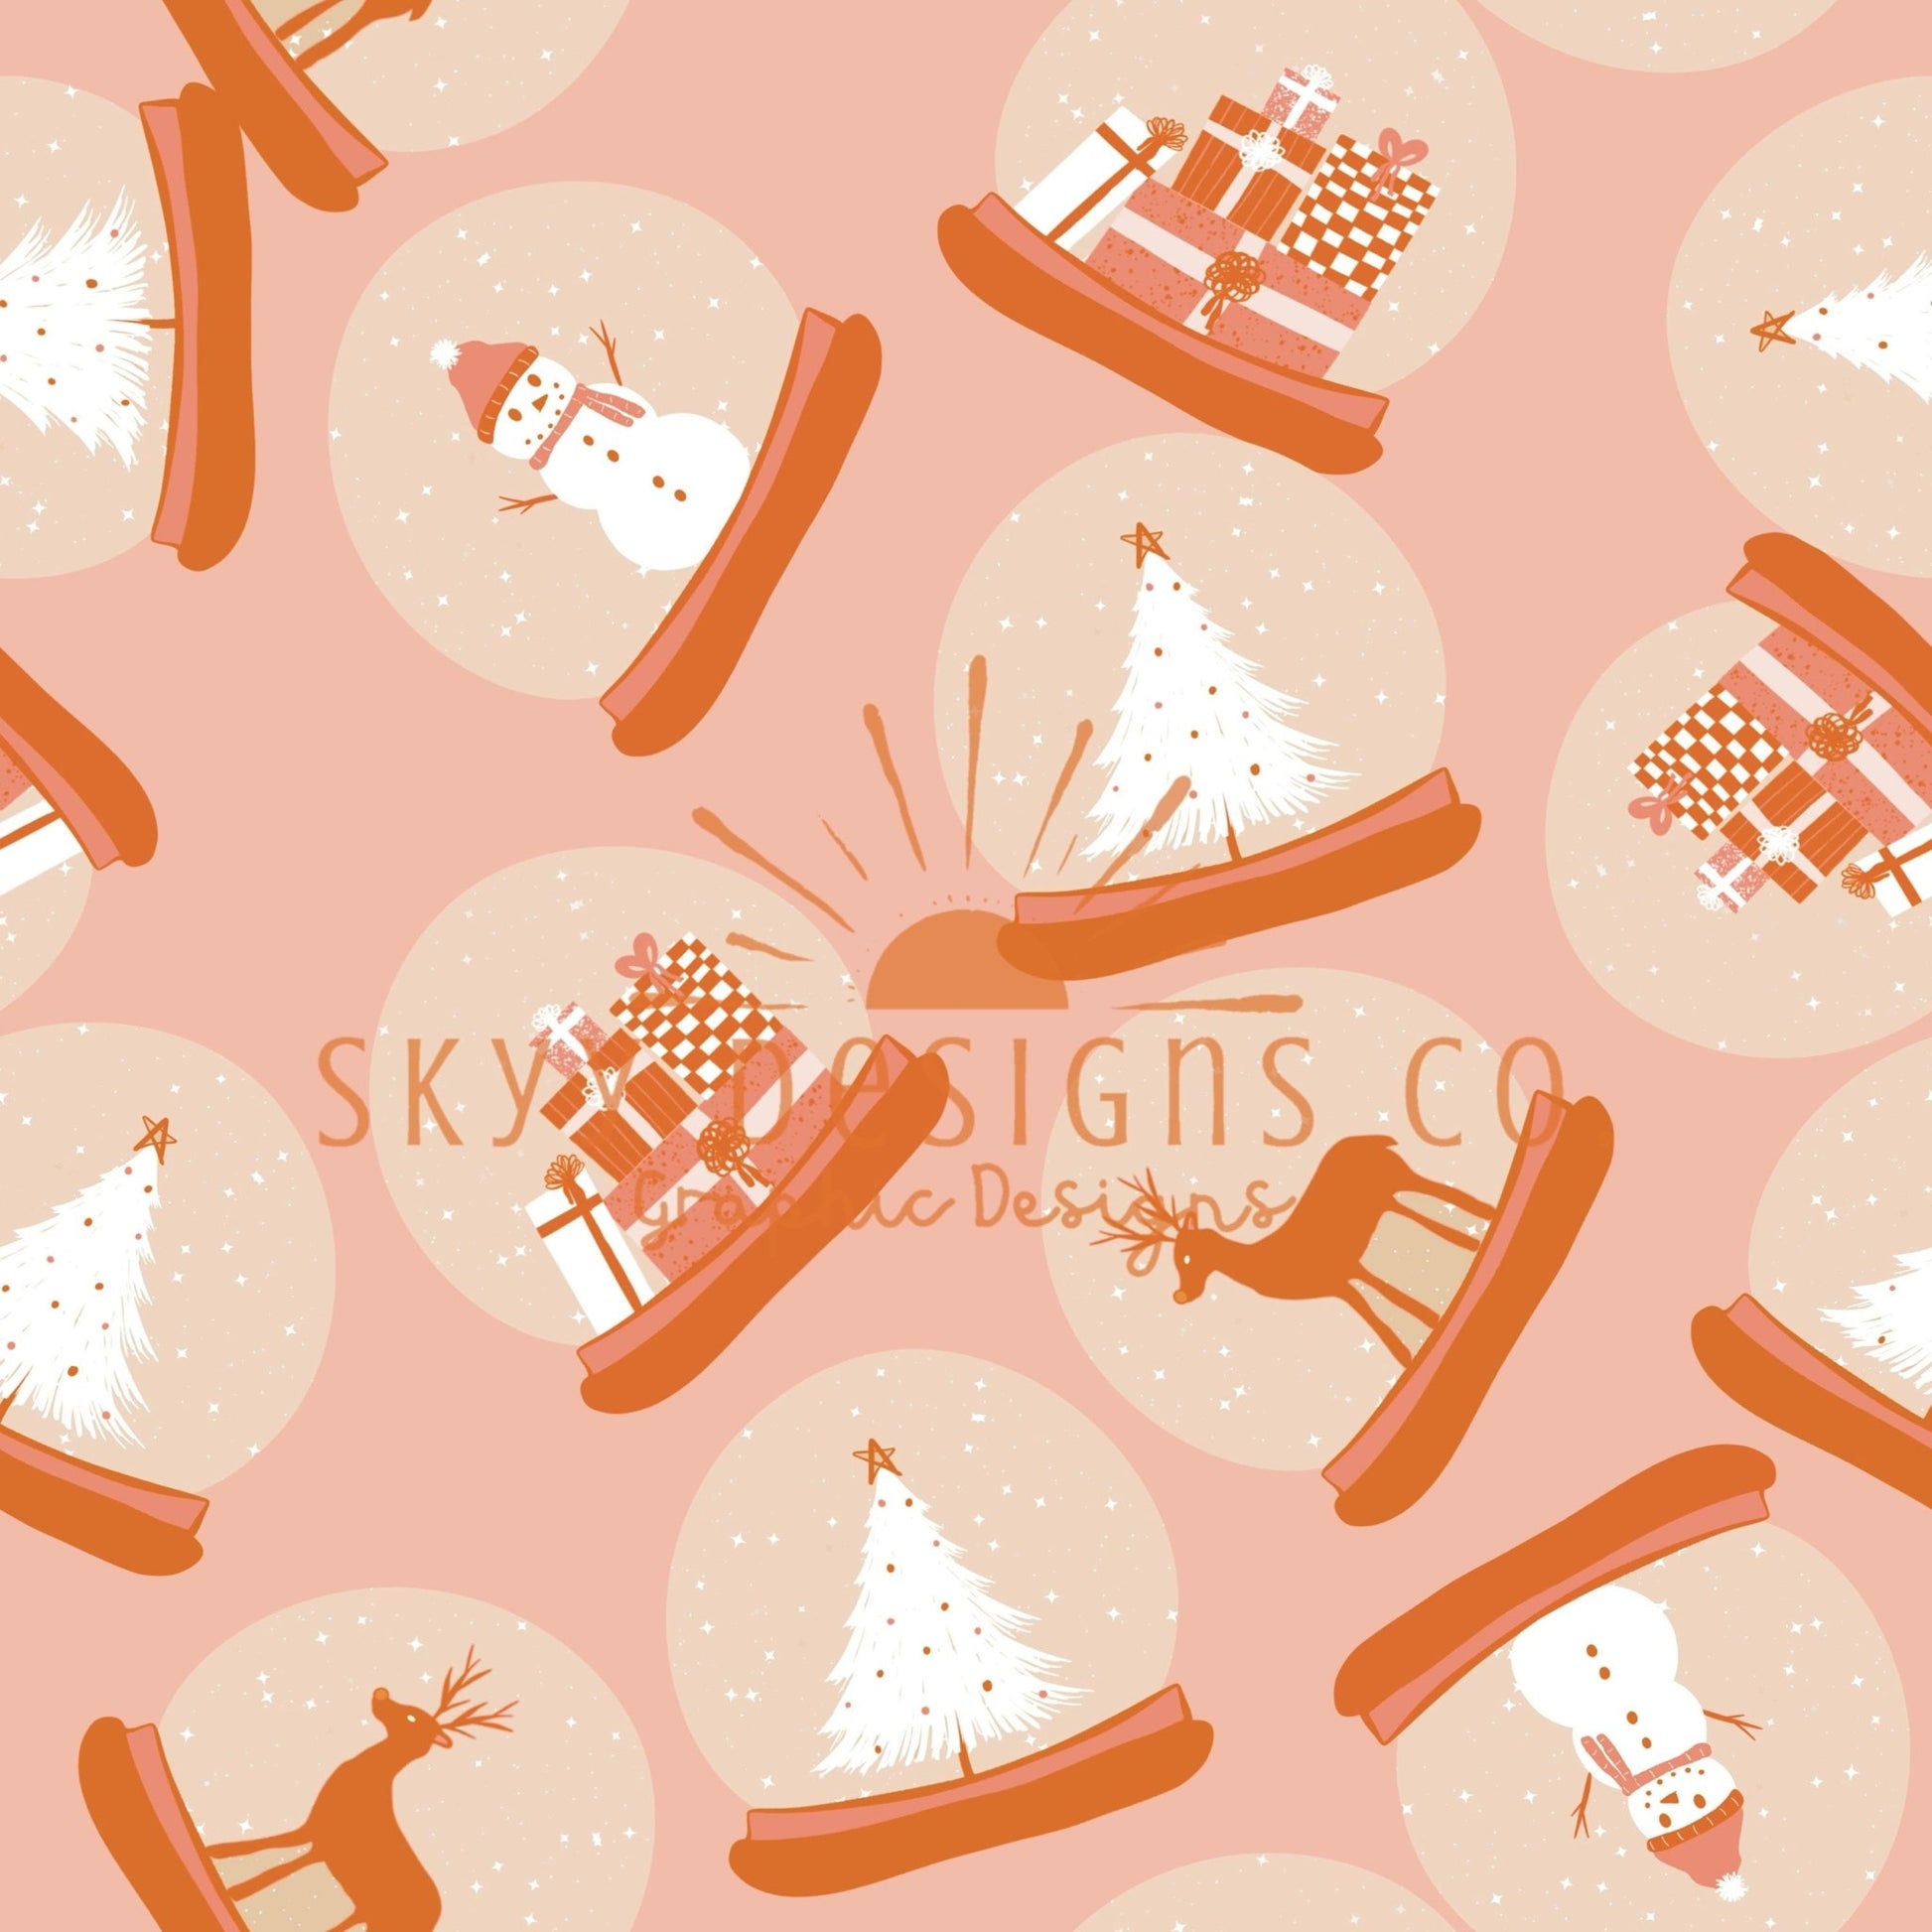 Snow globes seamless pattern for fabrics and wallpapers, Snow globes seamless pattern, Winter seamless design file for fabrics - SkyyDesignsCo